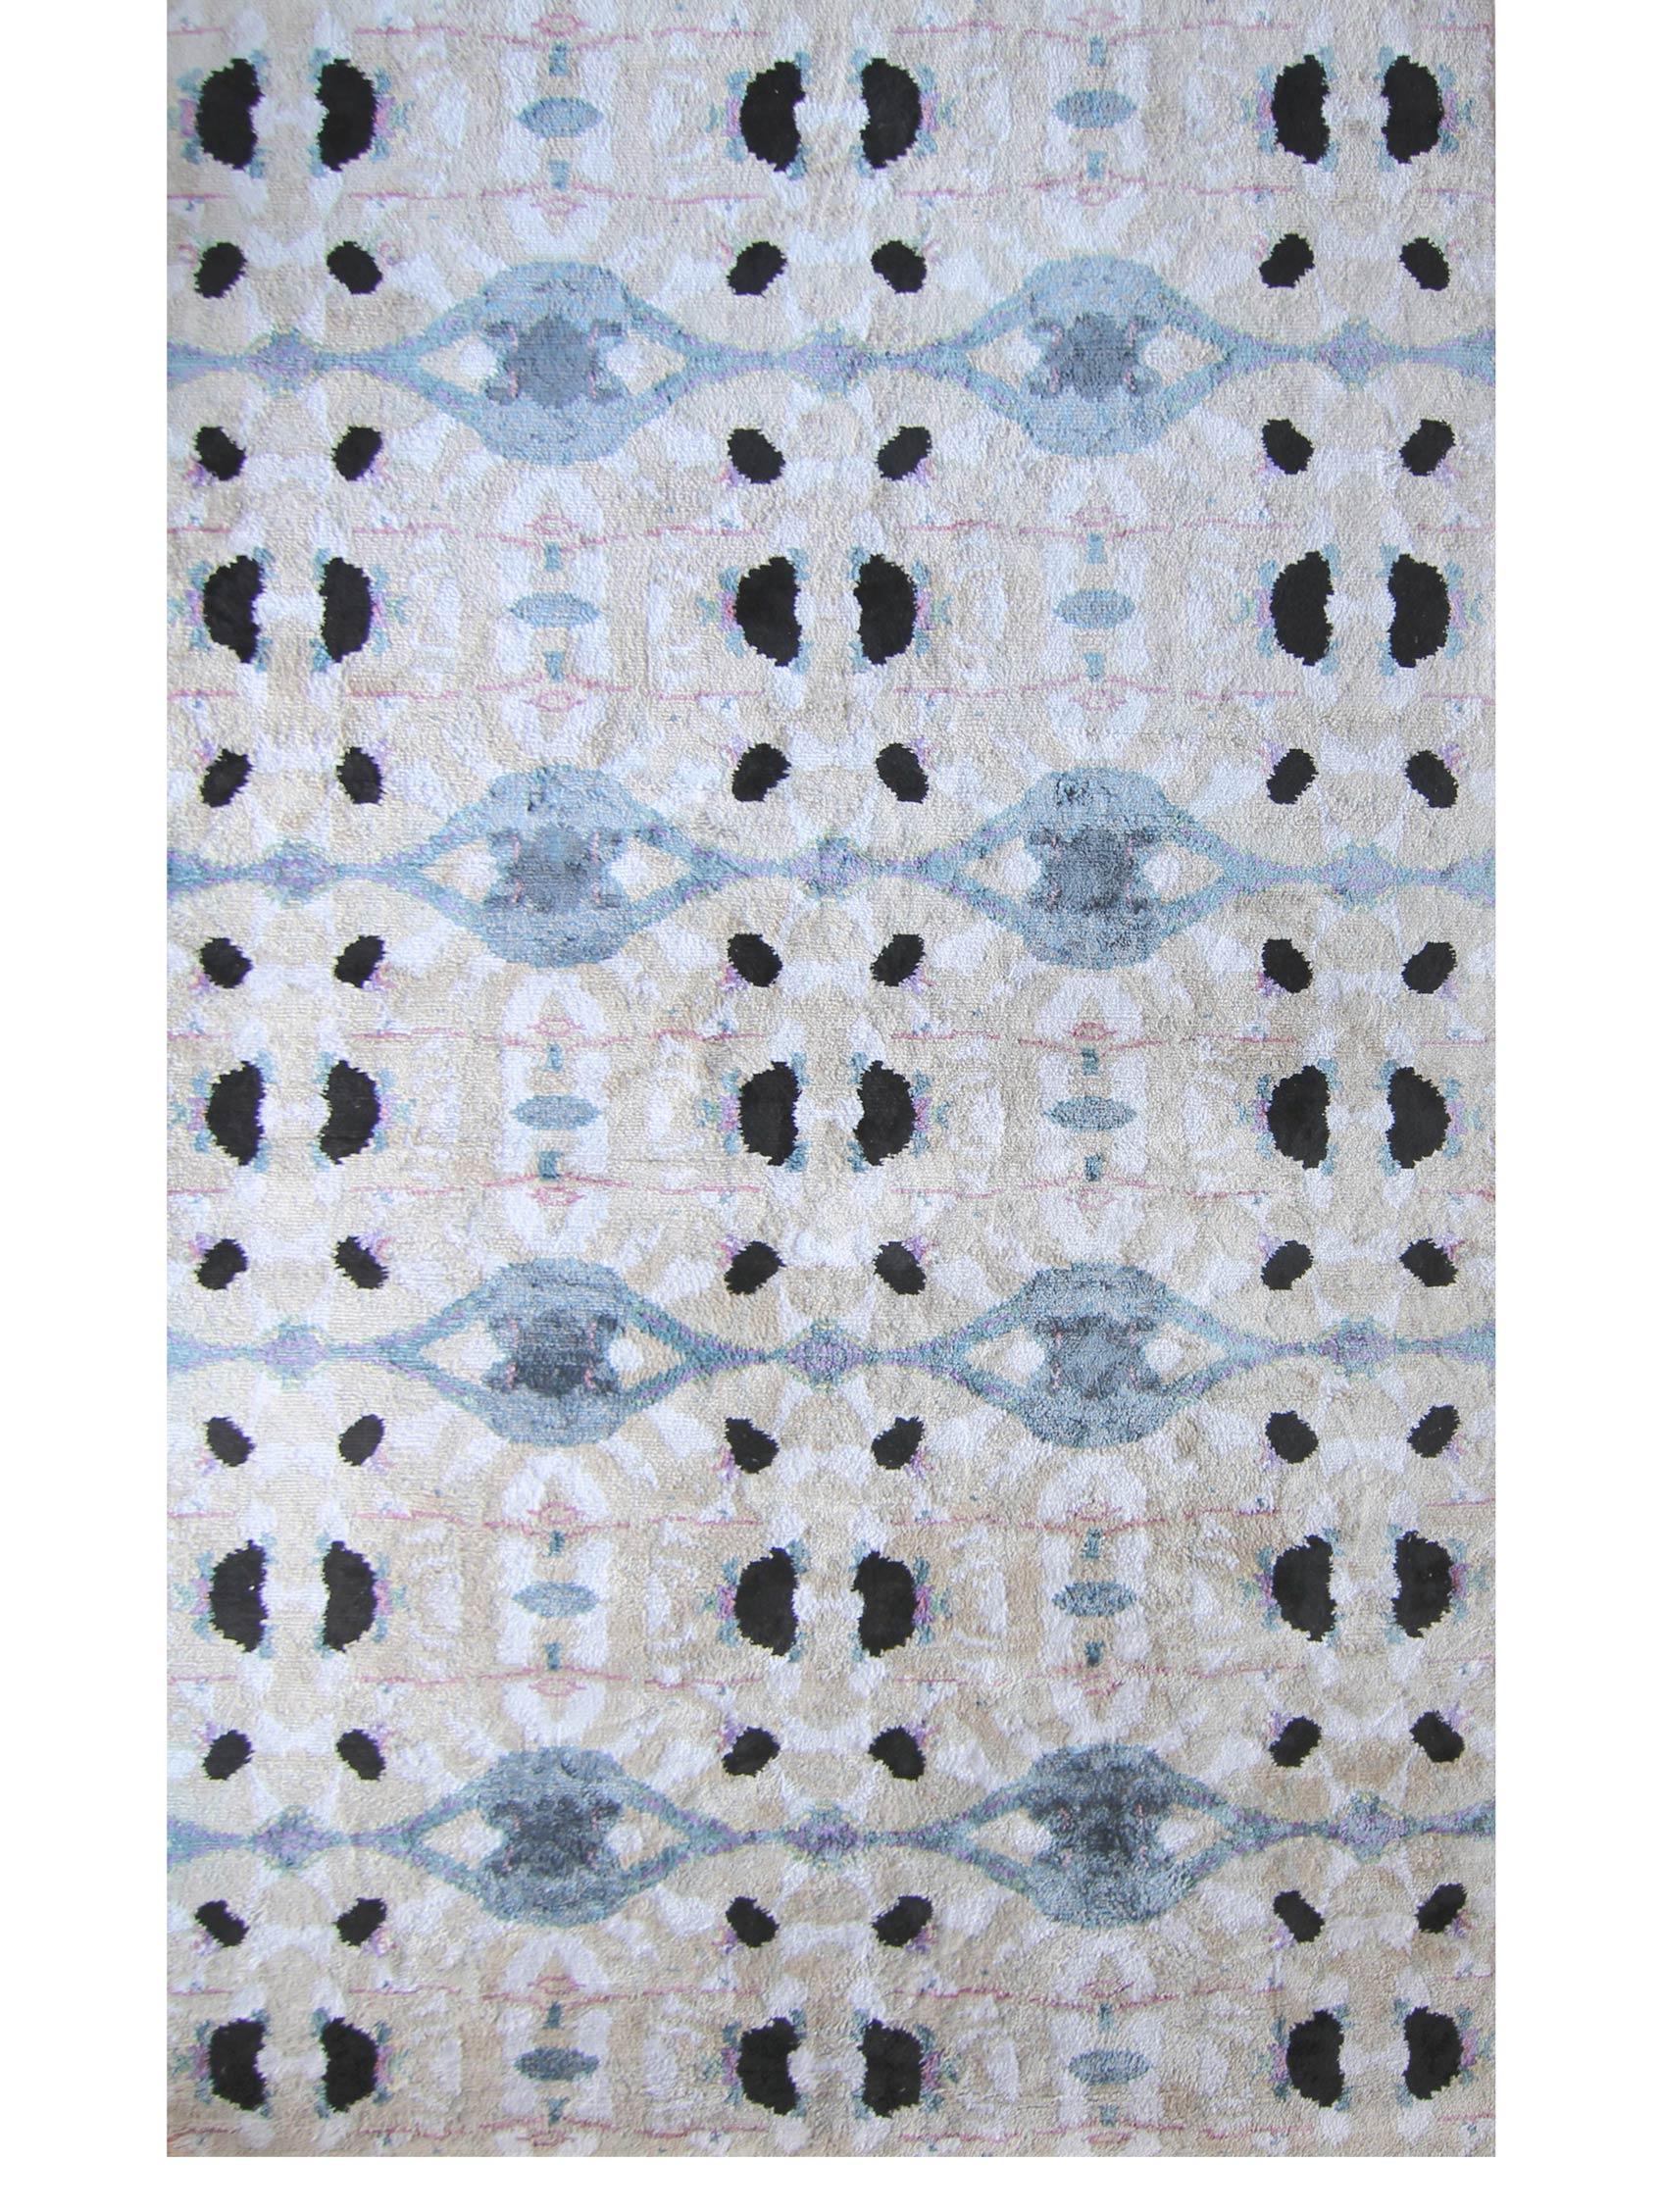 Galileo Glass Hand-Knotted Rug by Eskayel.
Dimensions: D 13' x H 8'.
Pile Height: 10 mm.
Materials: 100% Silk.

Eskayel hand-knotted rugs are woven to order and can be customized in various sizes, colors, materials, and weave constructions.